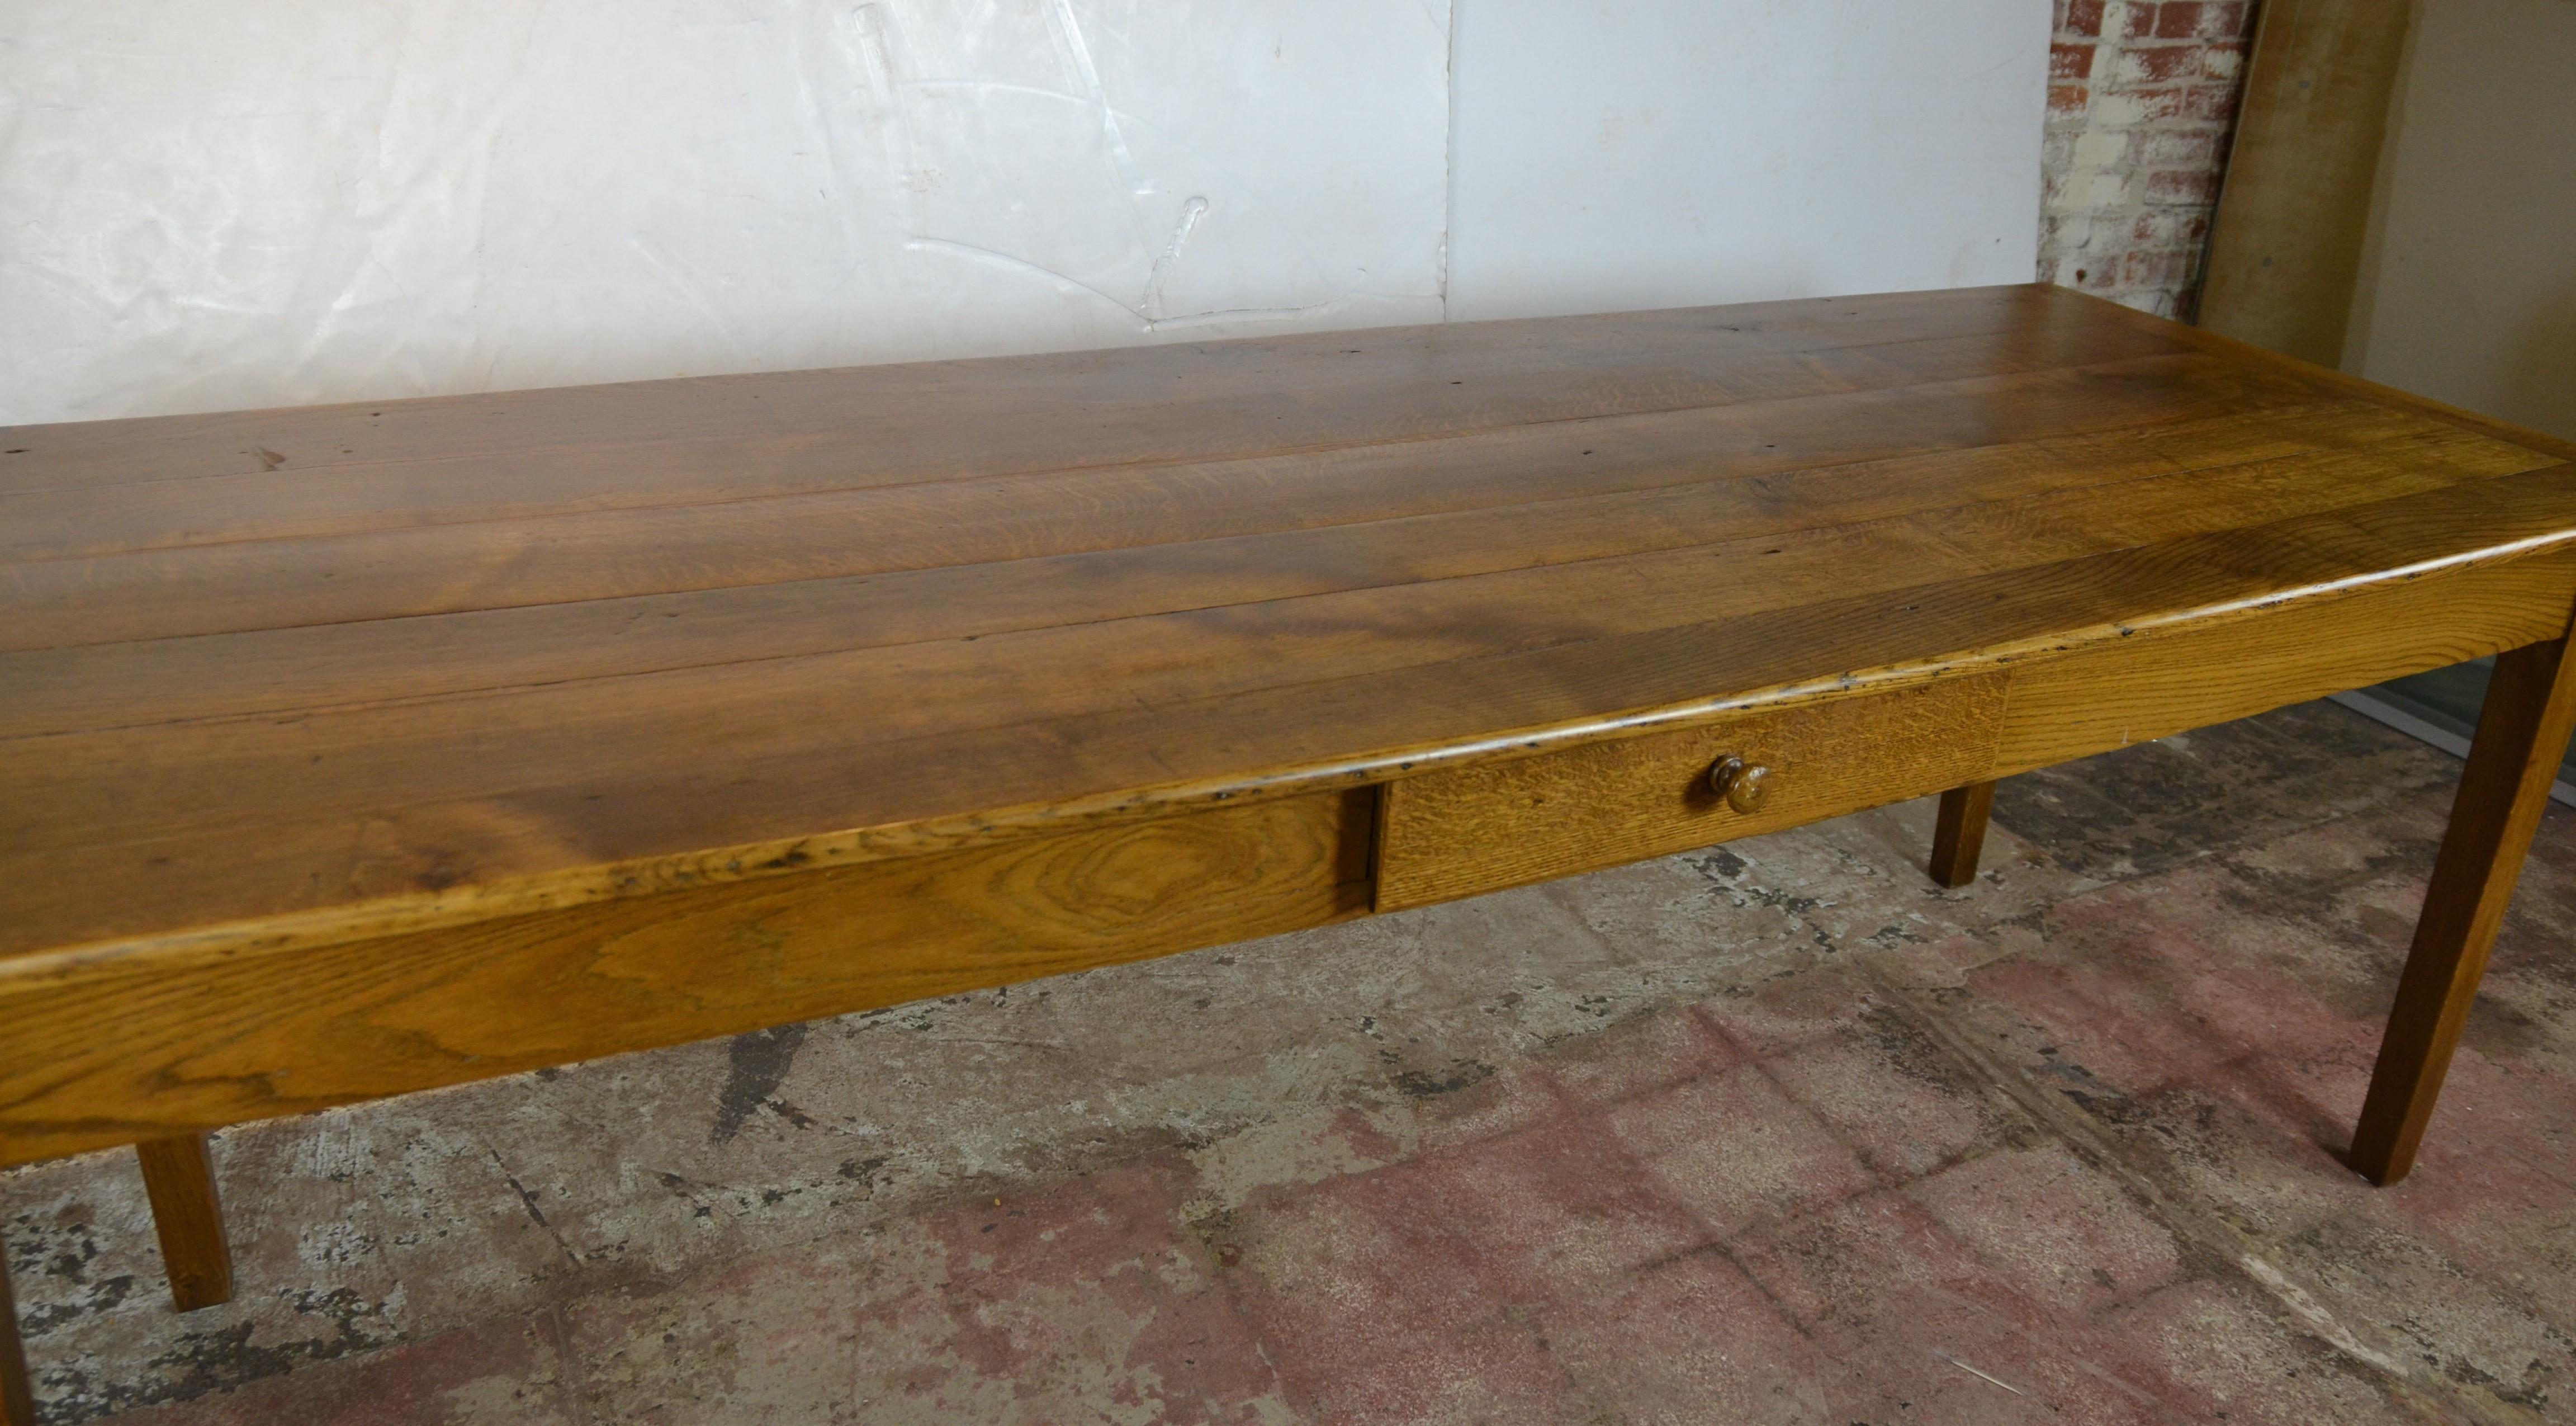 19th century restored oak French farm table with a single drawer the color and the wood grain is beautiful not too light not too dark. Apron height is a comfortable 25.50